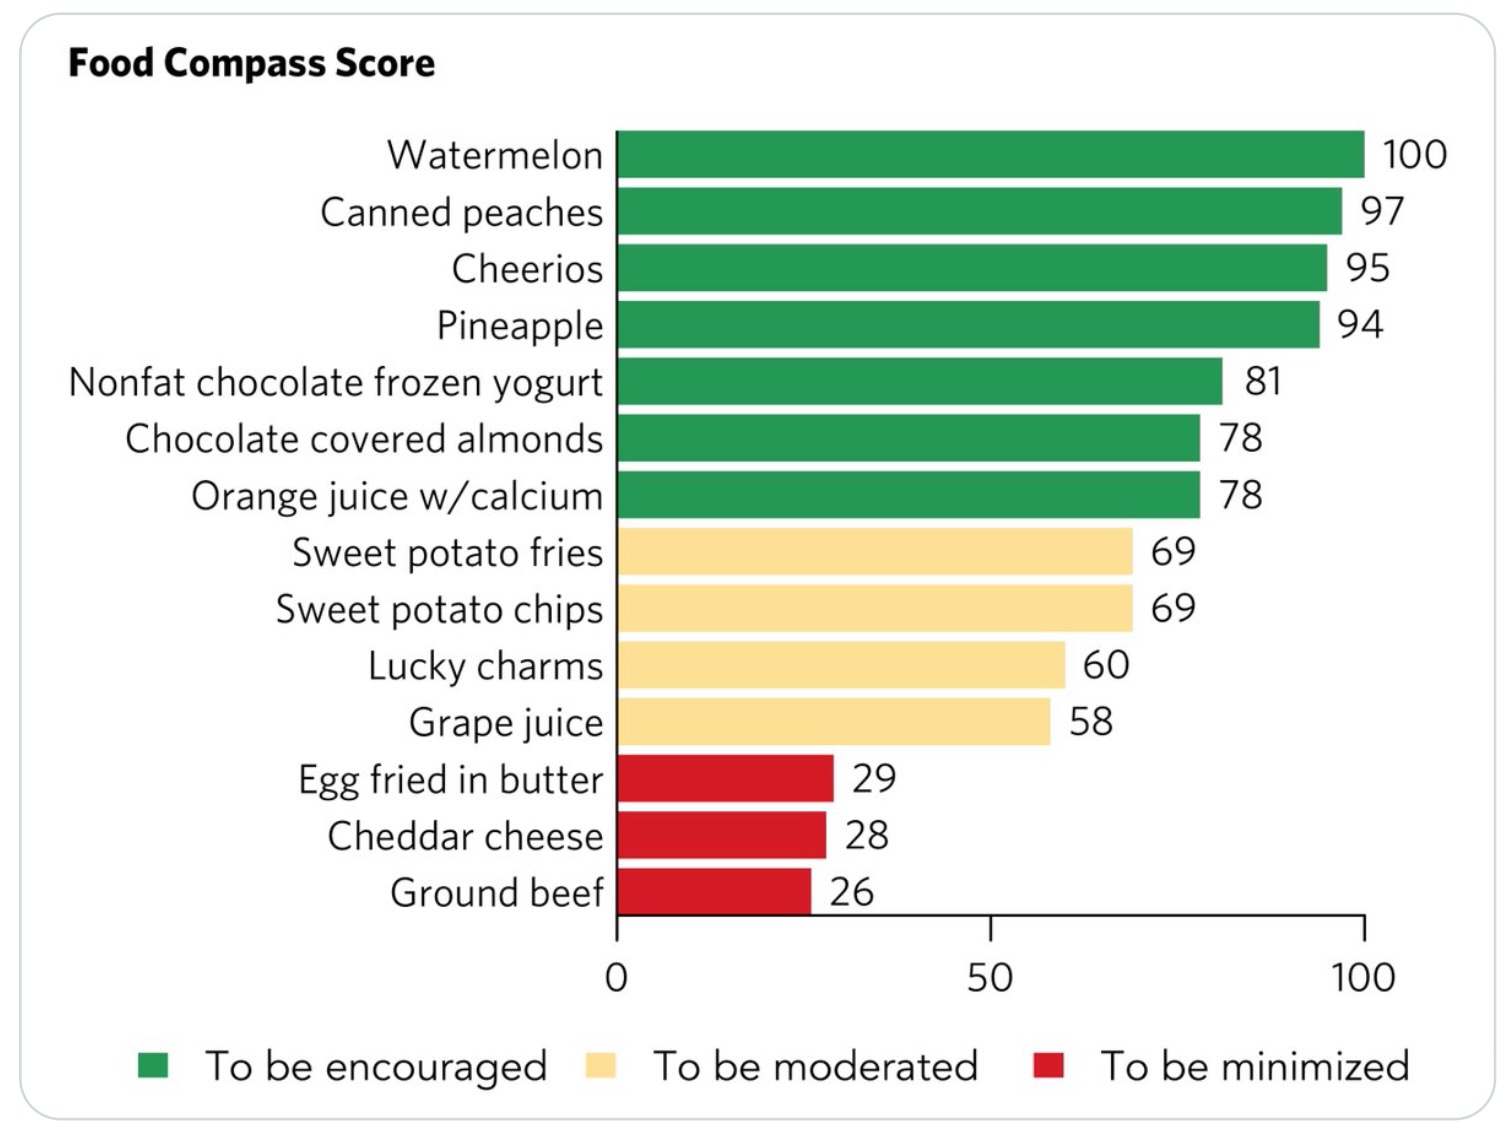 Food Compass Score, from encouraged (green: watermelon, Cheerios, chocolate-covered almonds), to moderate (yellow: sweet potato fries and chips, Lucky Charms), and to minimize (red: egg fried in butter, cheddar cheese, ground beef)